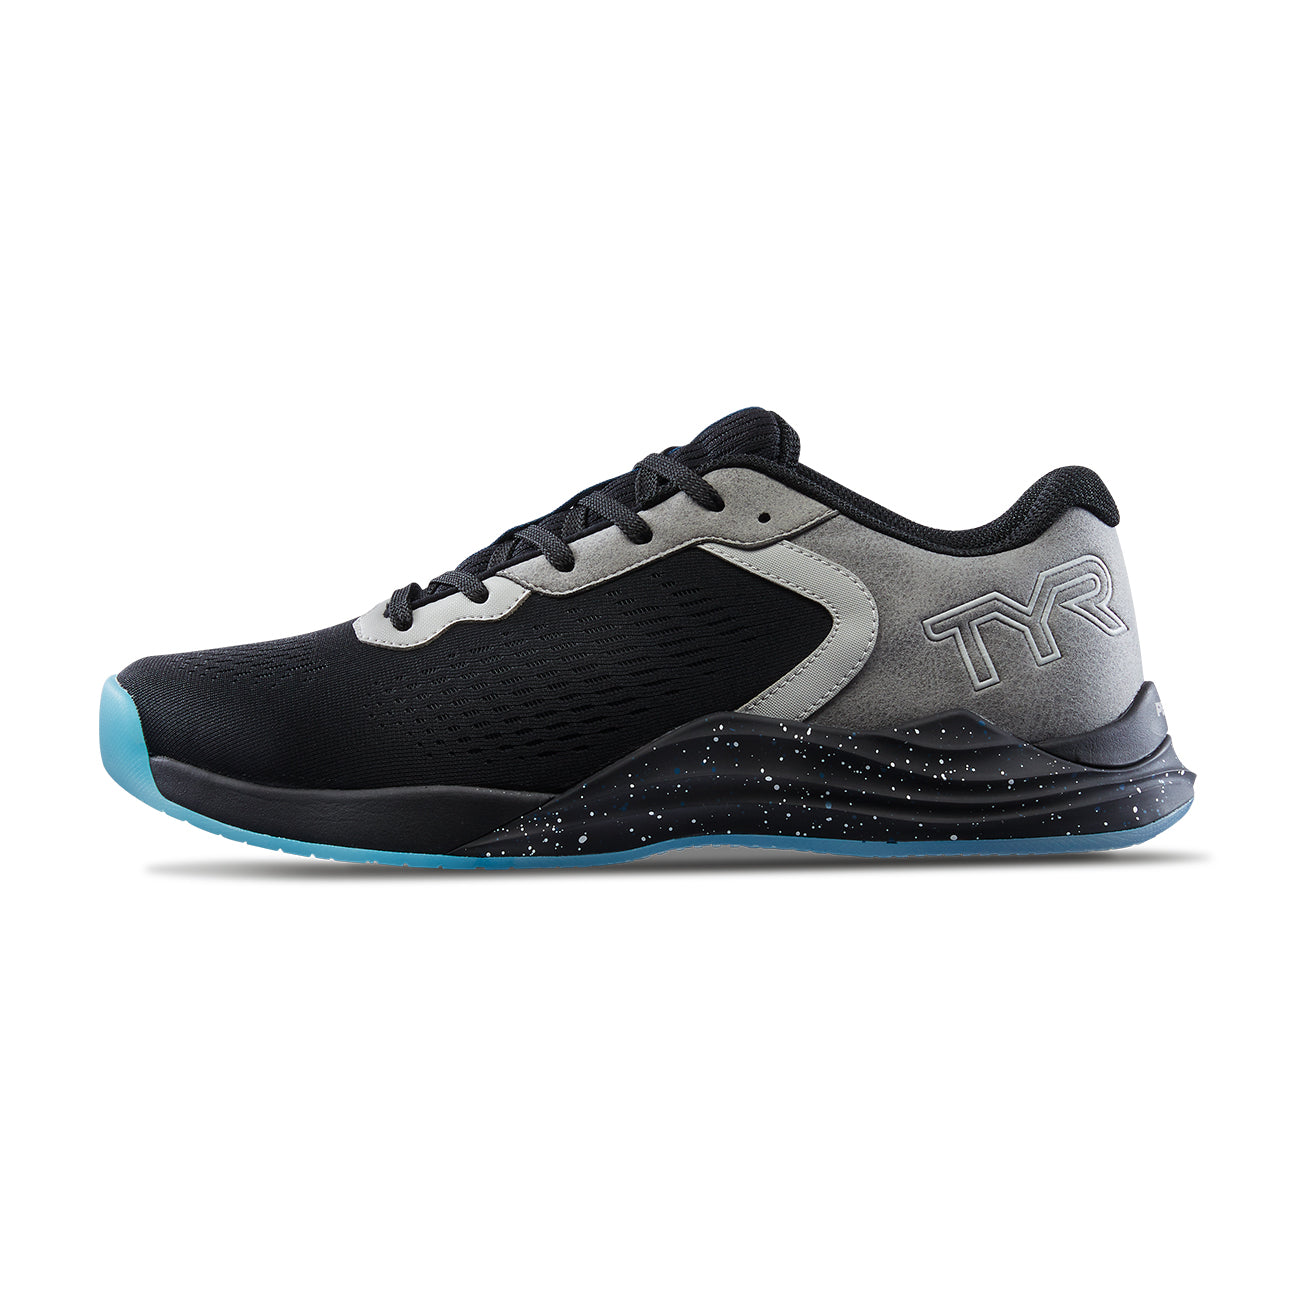 TYR Limited Edition Pat Vellner CXT-1 training shoe in black and teal